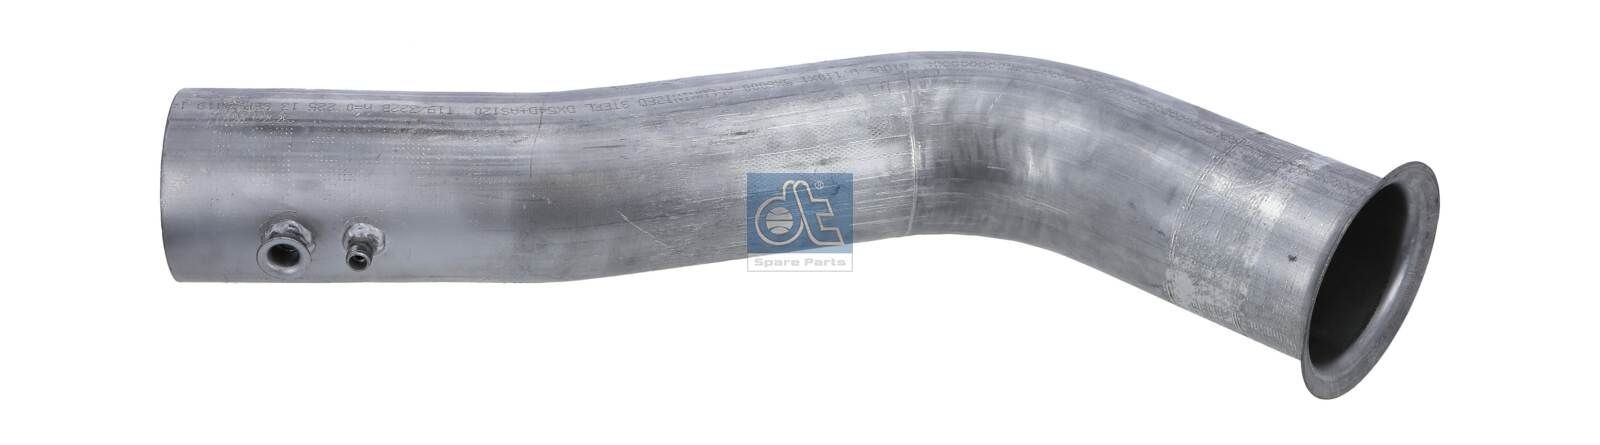 DT Spare Parts 3.25295 Exhaust Pipe 81.15205-5177